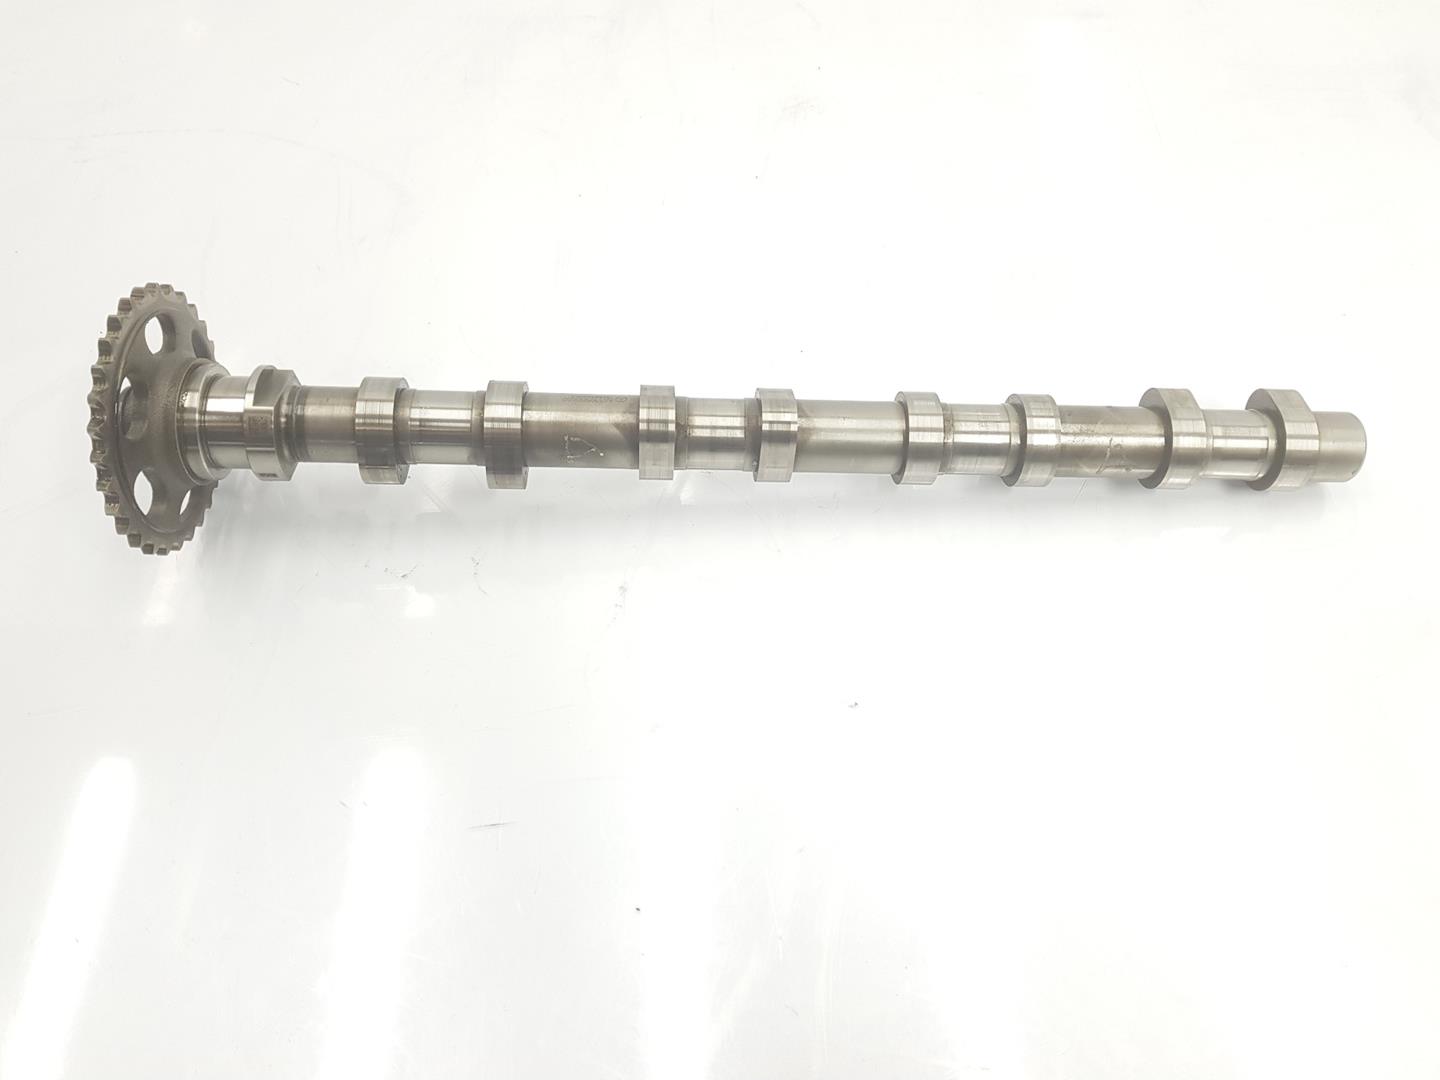 MERCEDES-BENZ CLA-Class C117 (2013-2016) Exhaust Camshaft A6510500600, ADMISION, 1111AA 19934075